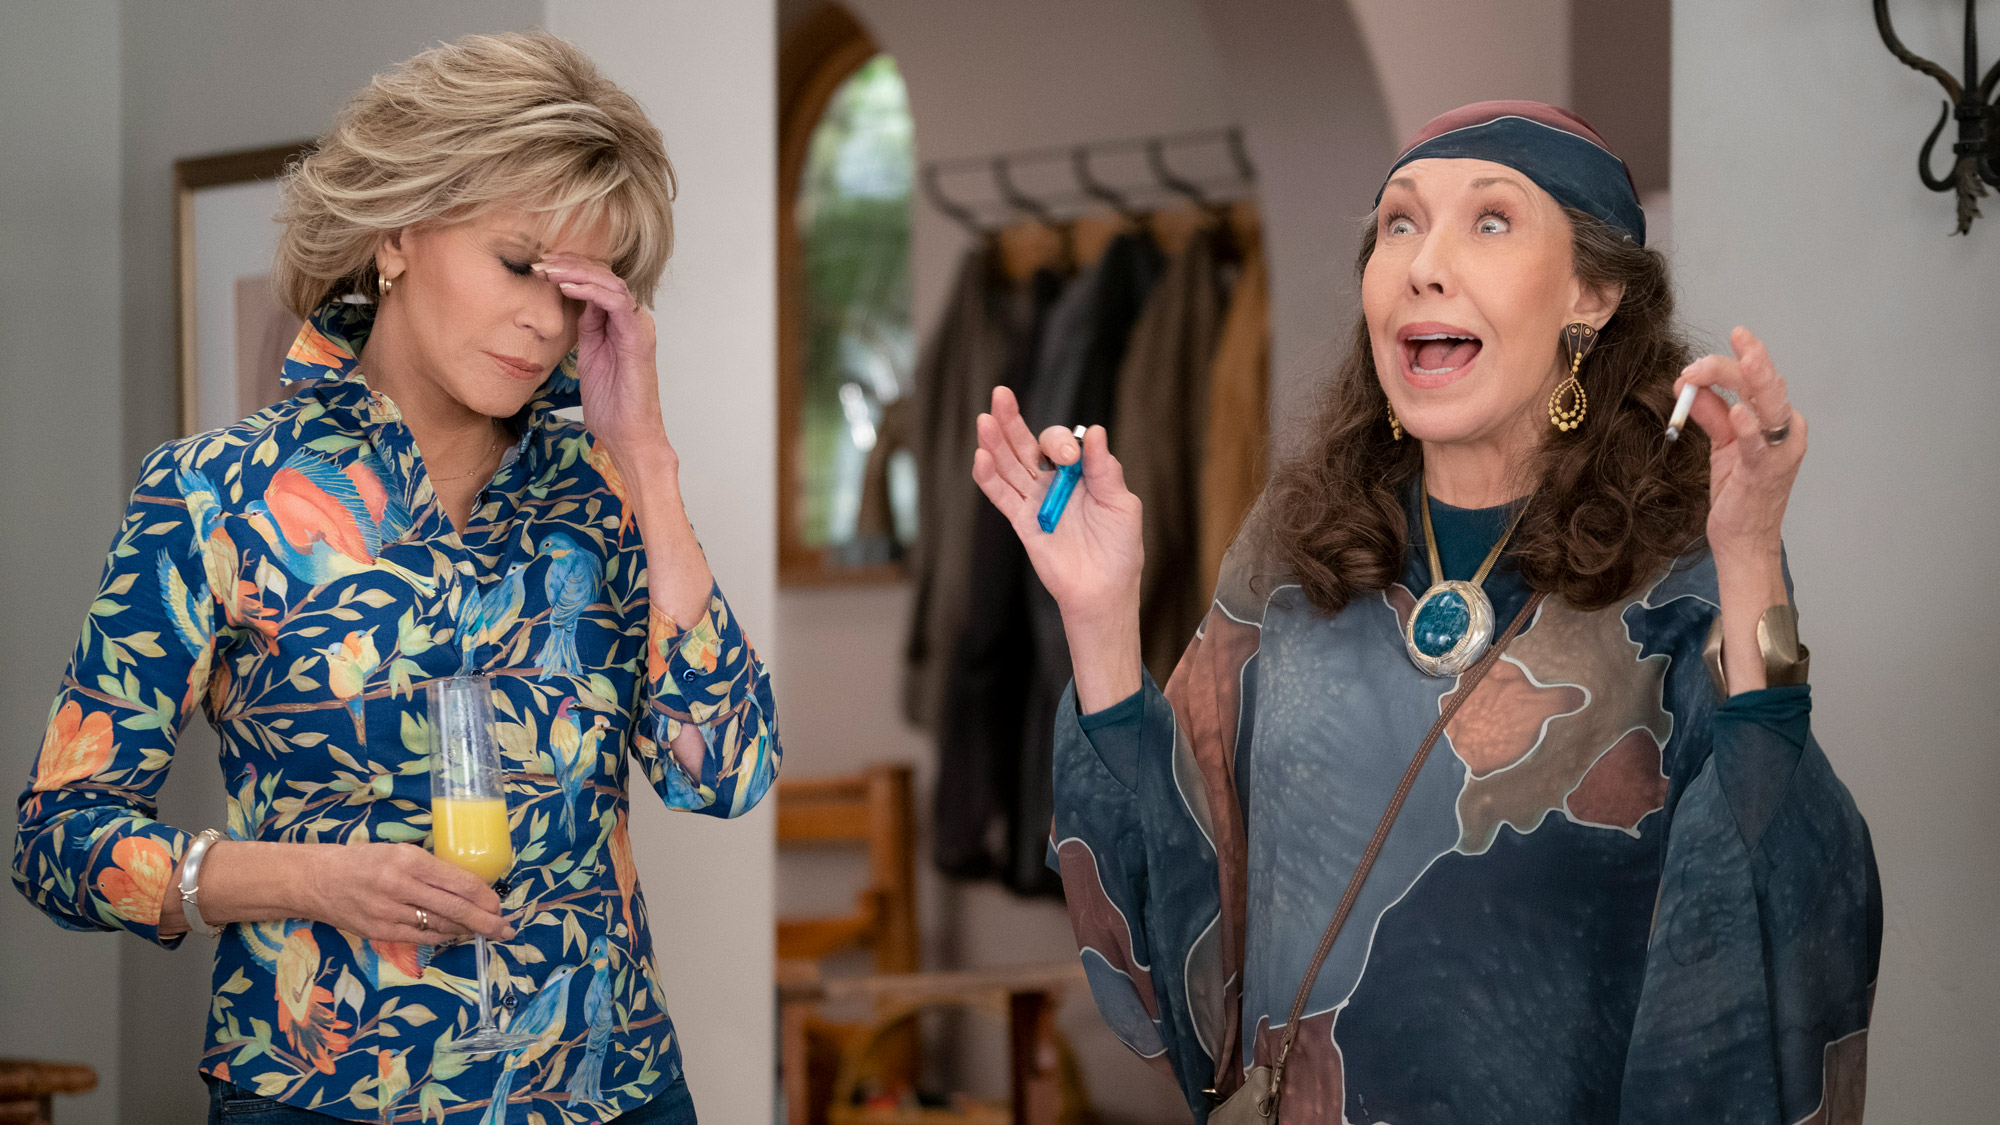 Lily Tomlin (as Frankie) holds a lighter and what appears to be a joint while Jane Fonda (as Grace) holds a hand to her own forehead